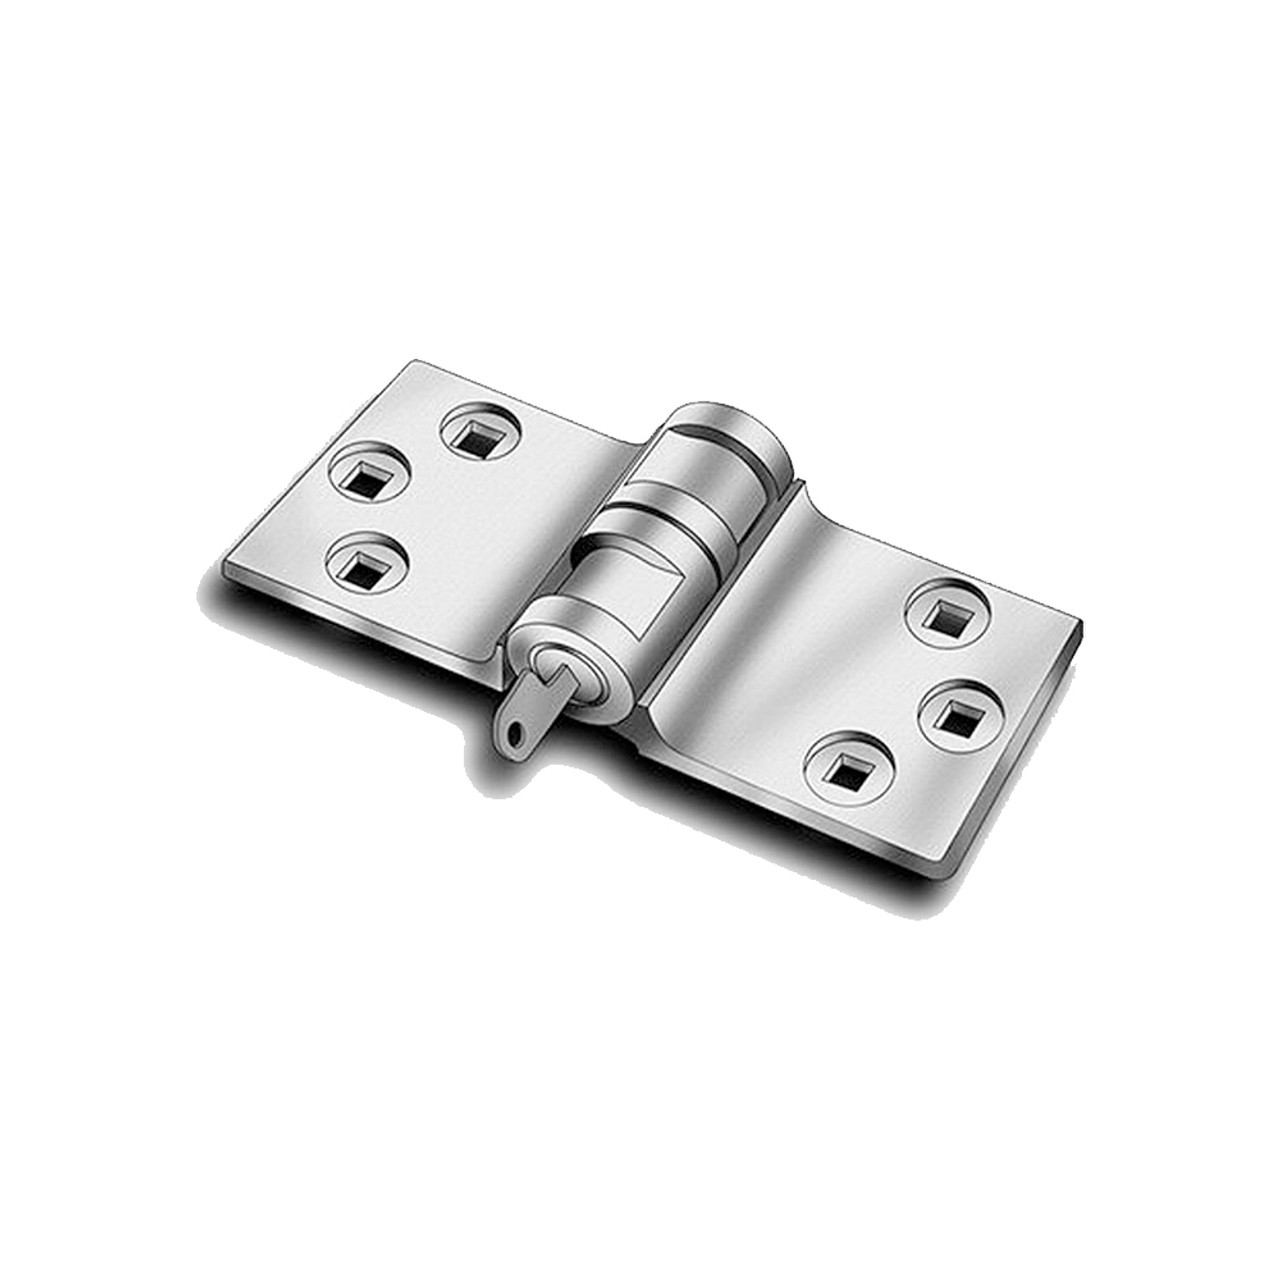 Tufloc 50-Series High-Security Door Locks for Vans and Buildings, Stainless Steel, Features Medeco high-security cylinders, Mounts to Fit Inward, Outward, Double-Swinging, Sliding and Roll-Up Doors, Criminal Resistant Design